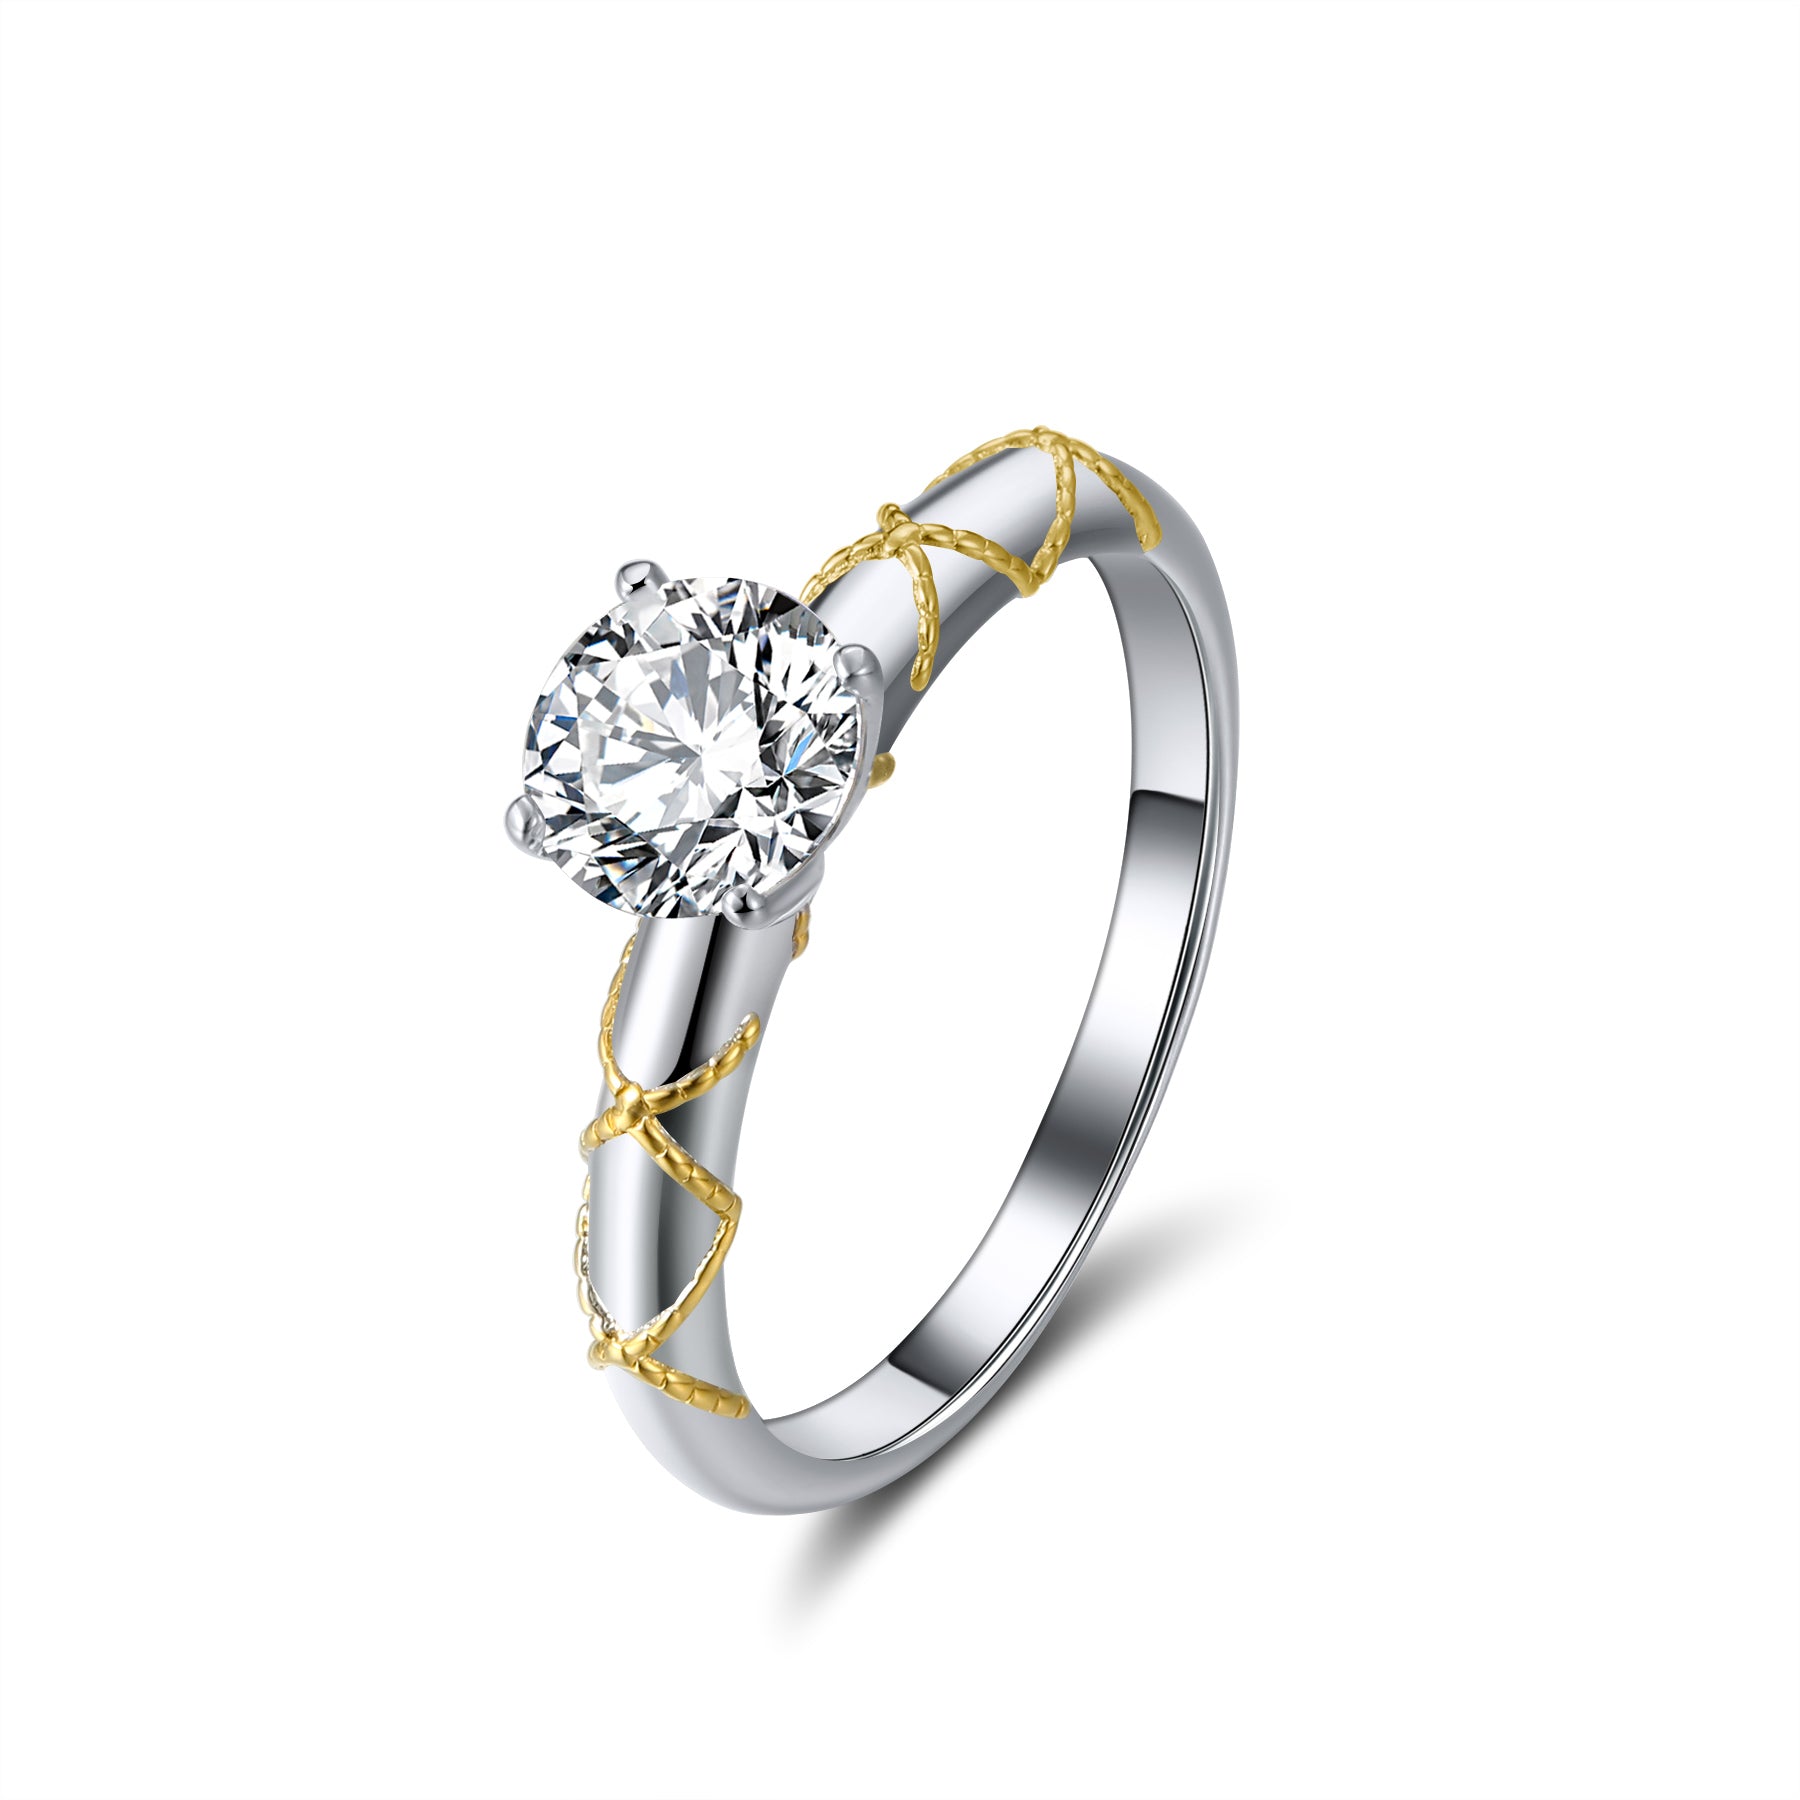 Amore Mia Engagement Ring Women 1 Ct Moissanite Sterling Silver Ginger Lyne Collection - Gold Trim,6